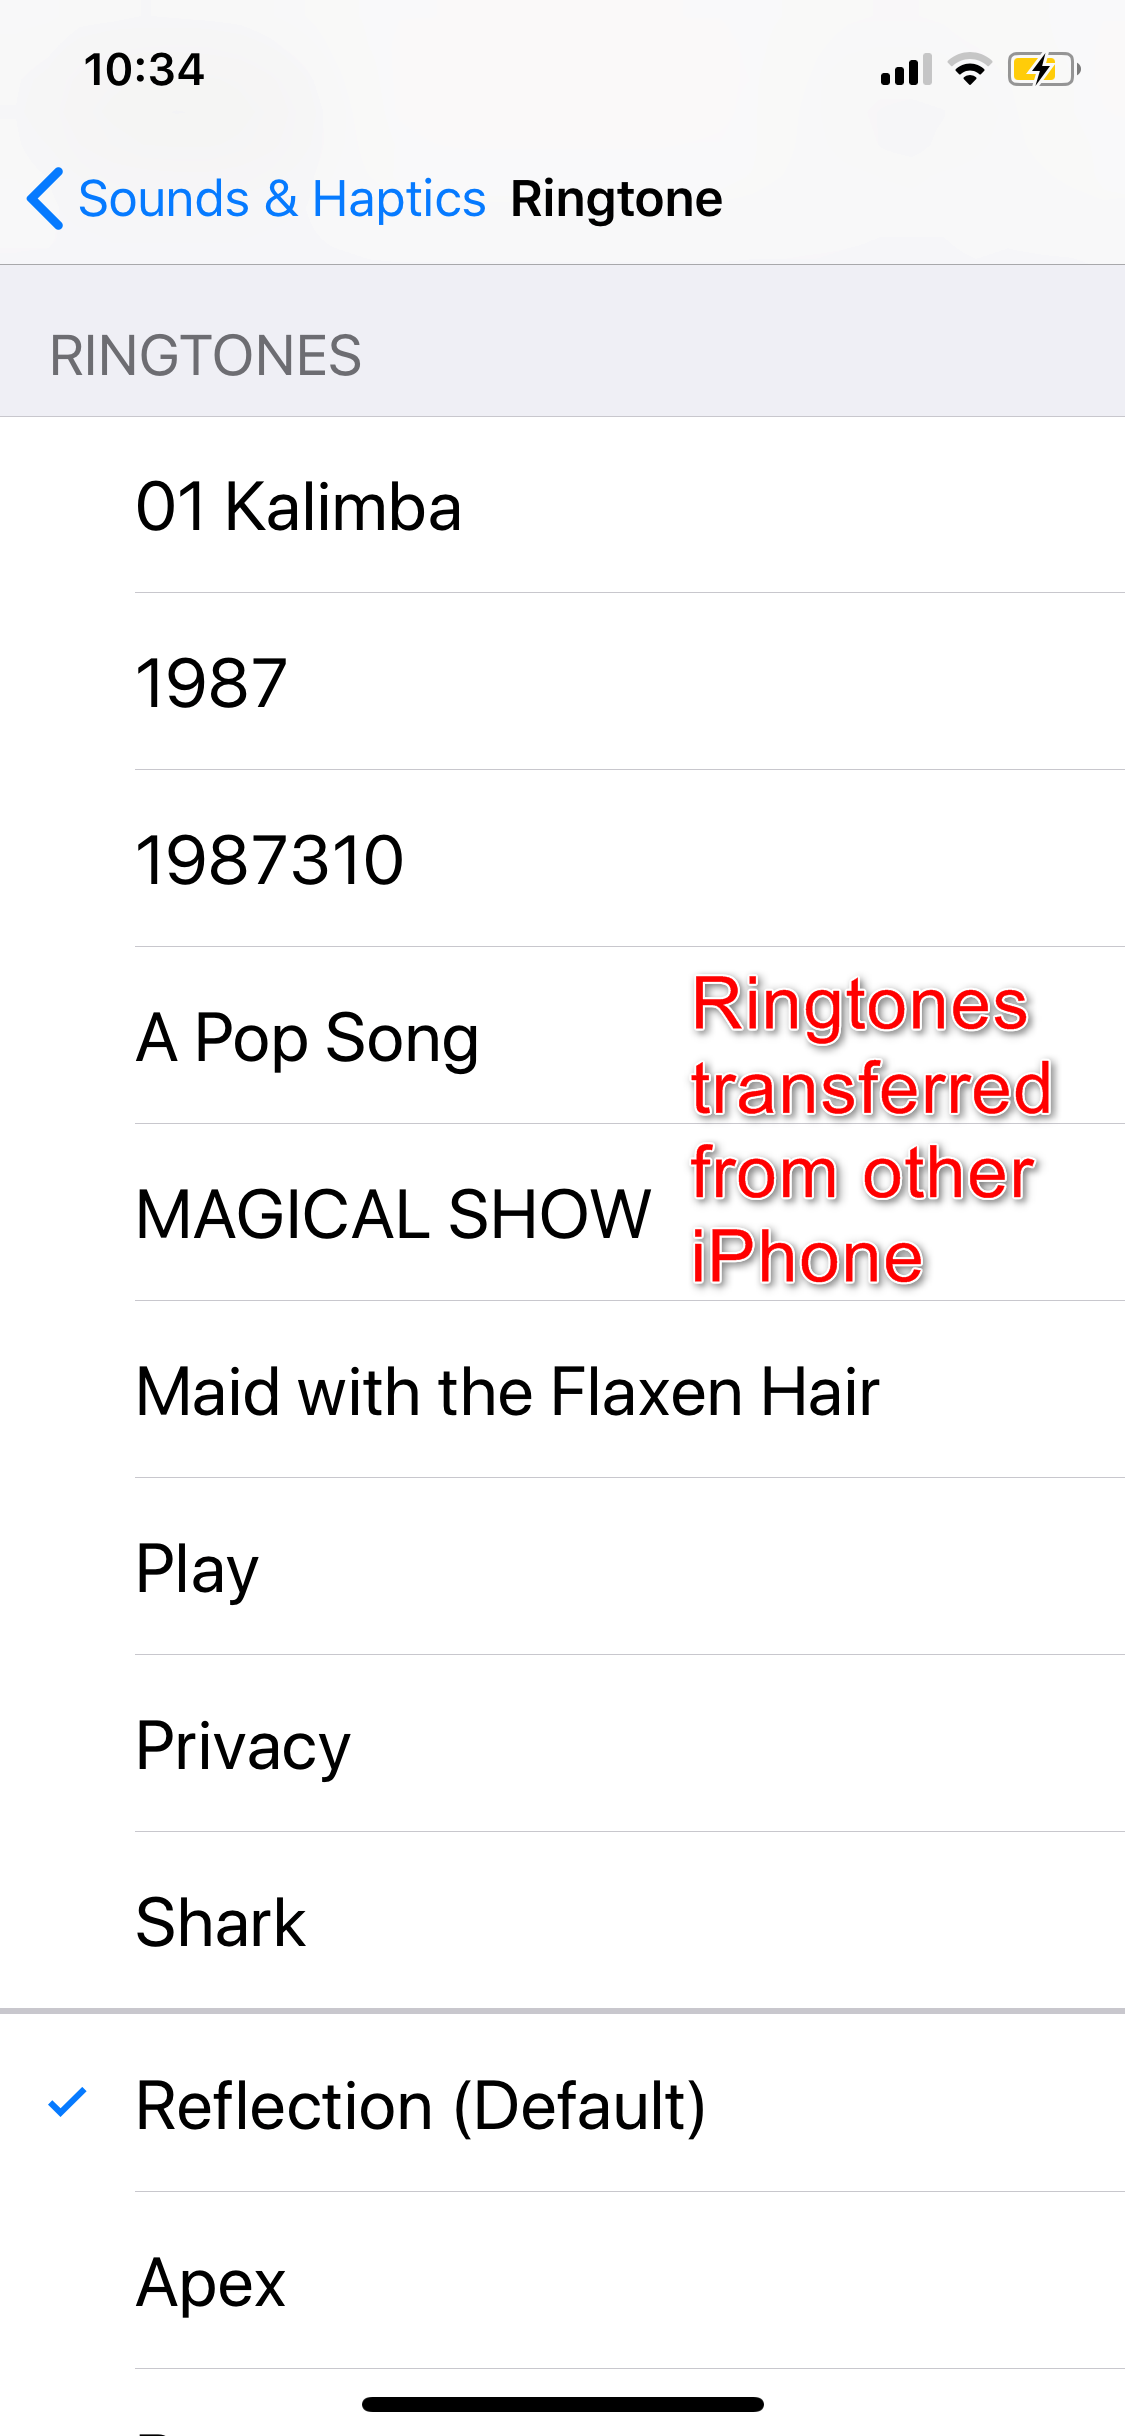 will apple ringtones transfer to a new phone